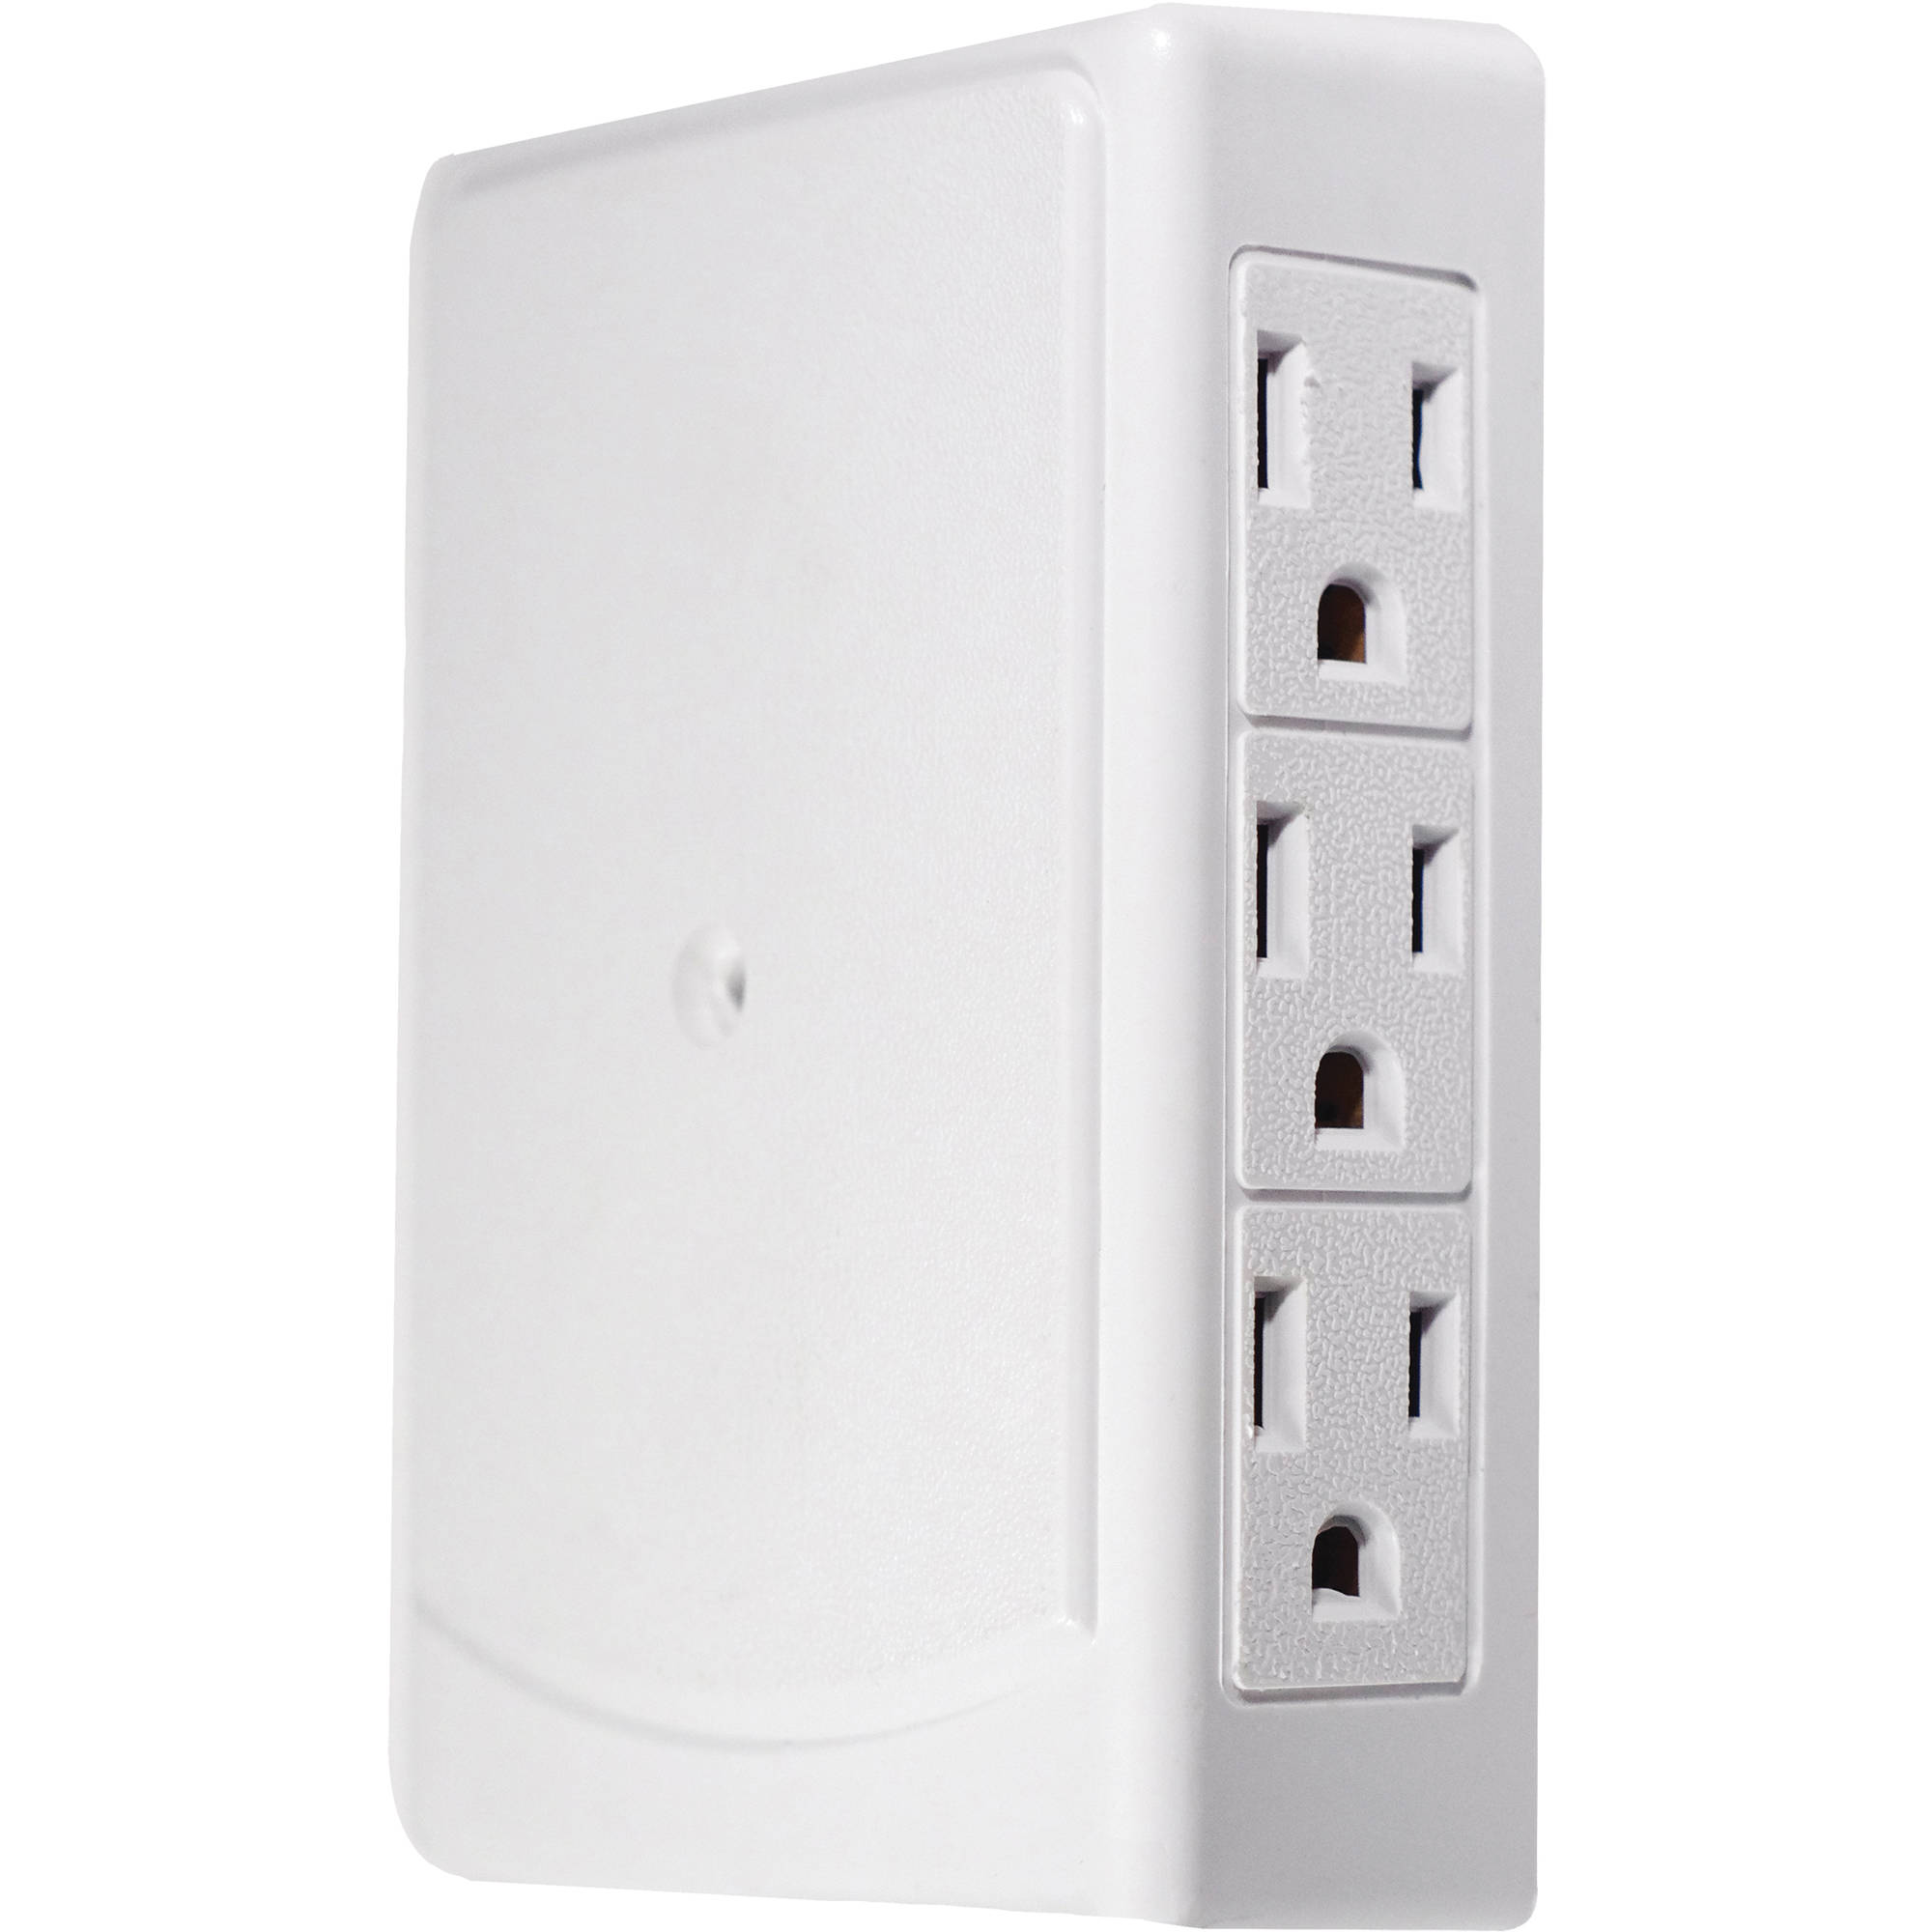 Go Green 6-Outlet Side-Mount Wall Tap Adapter (White)